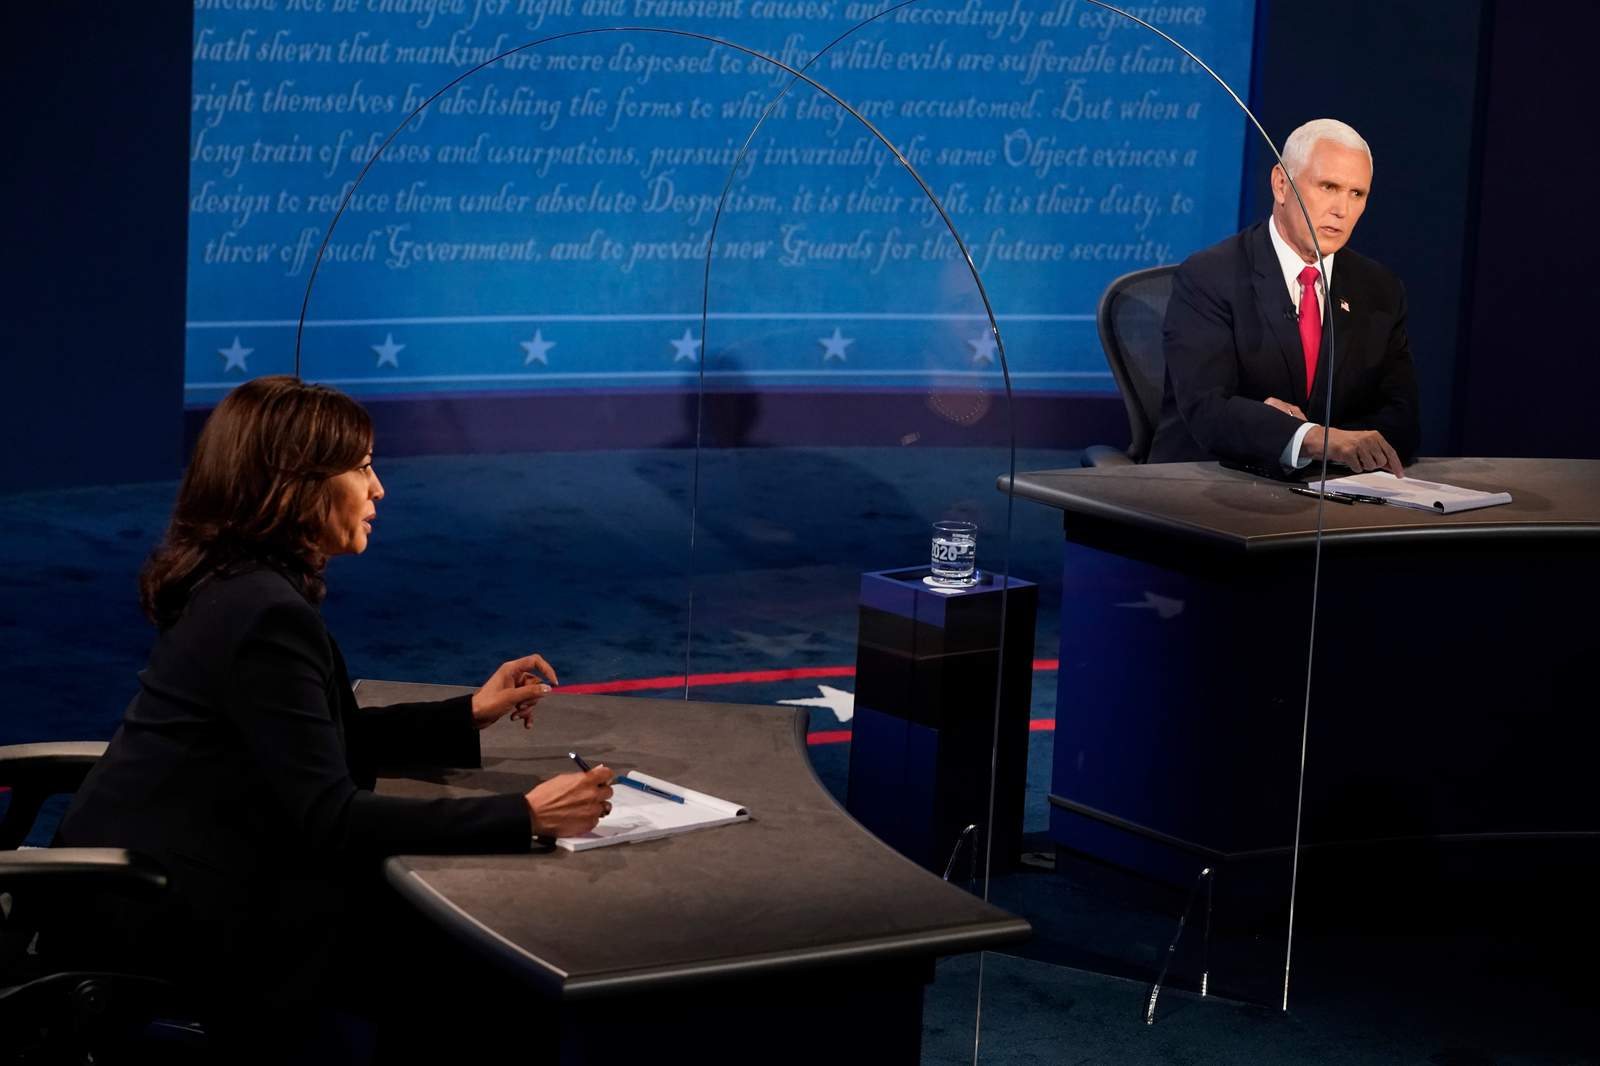 5 questions we hope you’ll weigh in on, following the Pence-Harris debate